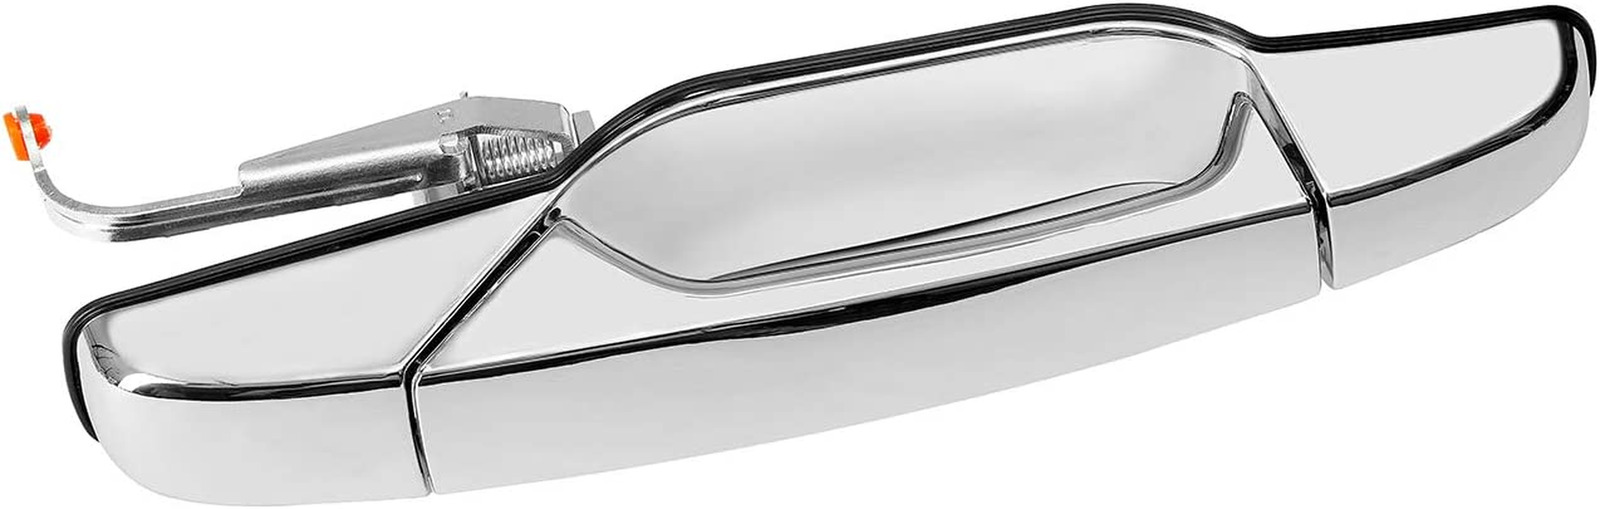 Exterior Chrome Door Handle Rear Right Passenger Side | for 2007-2013 Chevy Silv